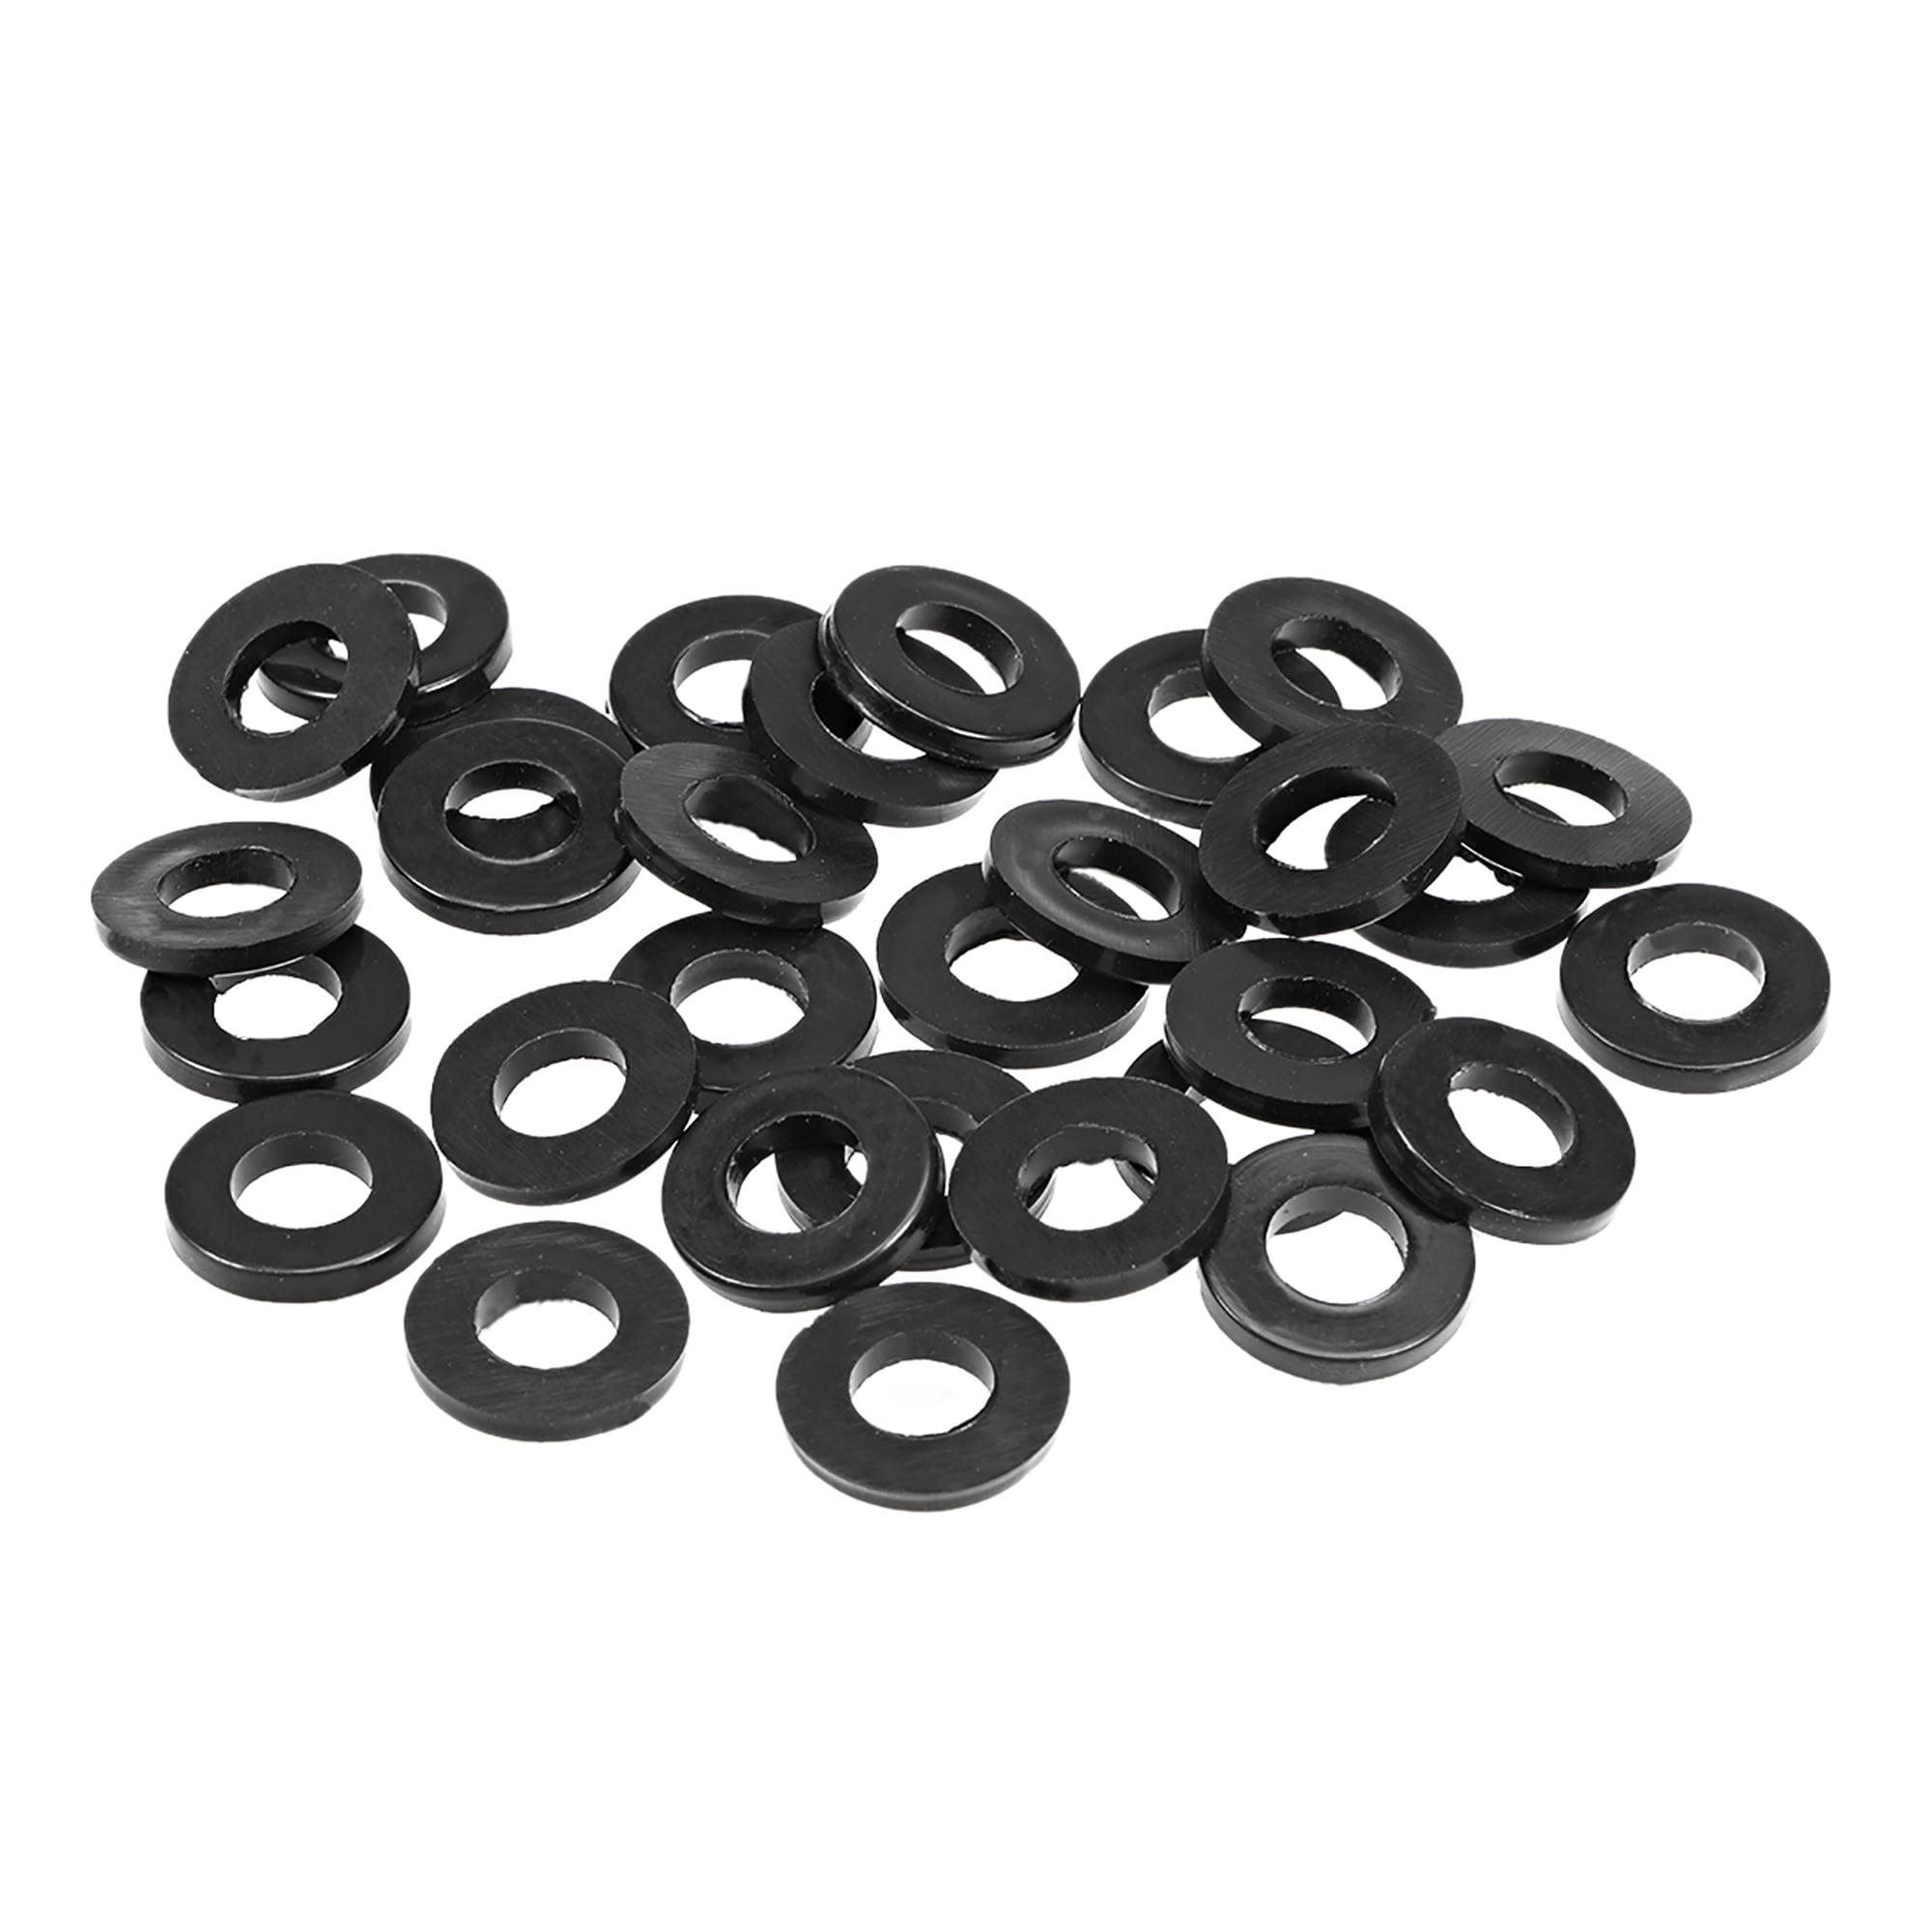 Pack of 20 uxcell Rubber Flat Washers 8mm OD 3mm ID 3mm Thickness for Faucet Pipe Water Hose